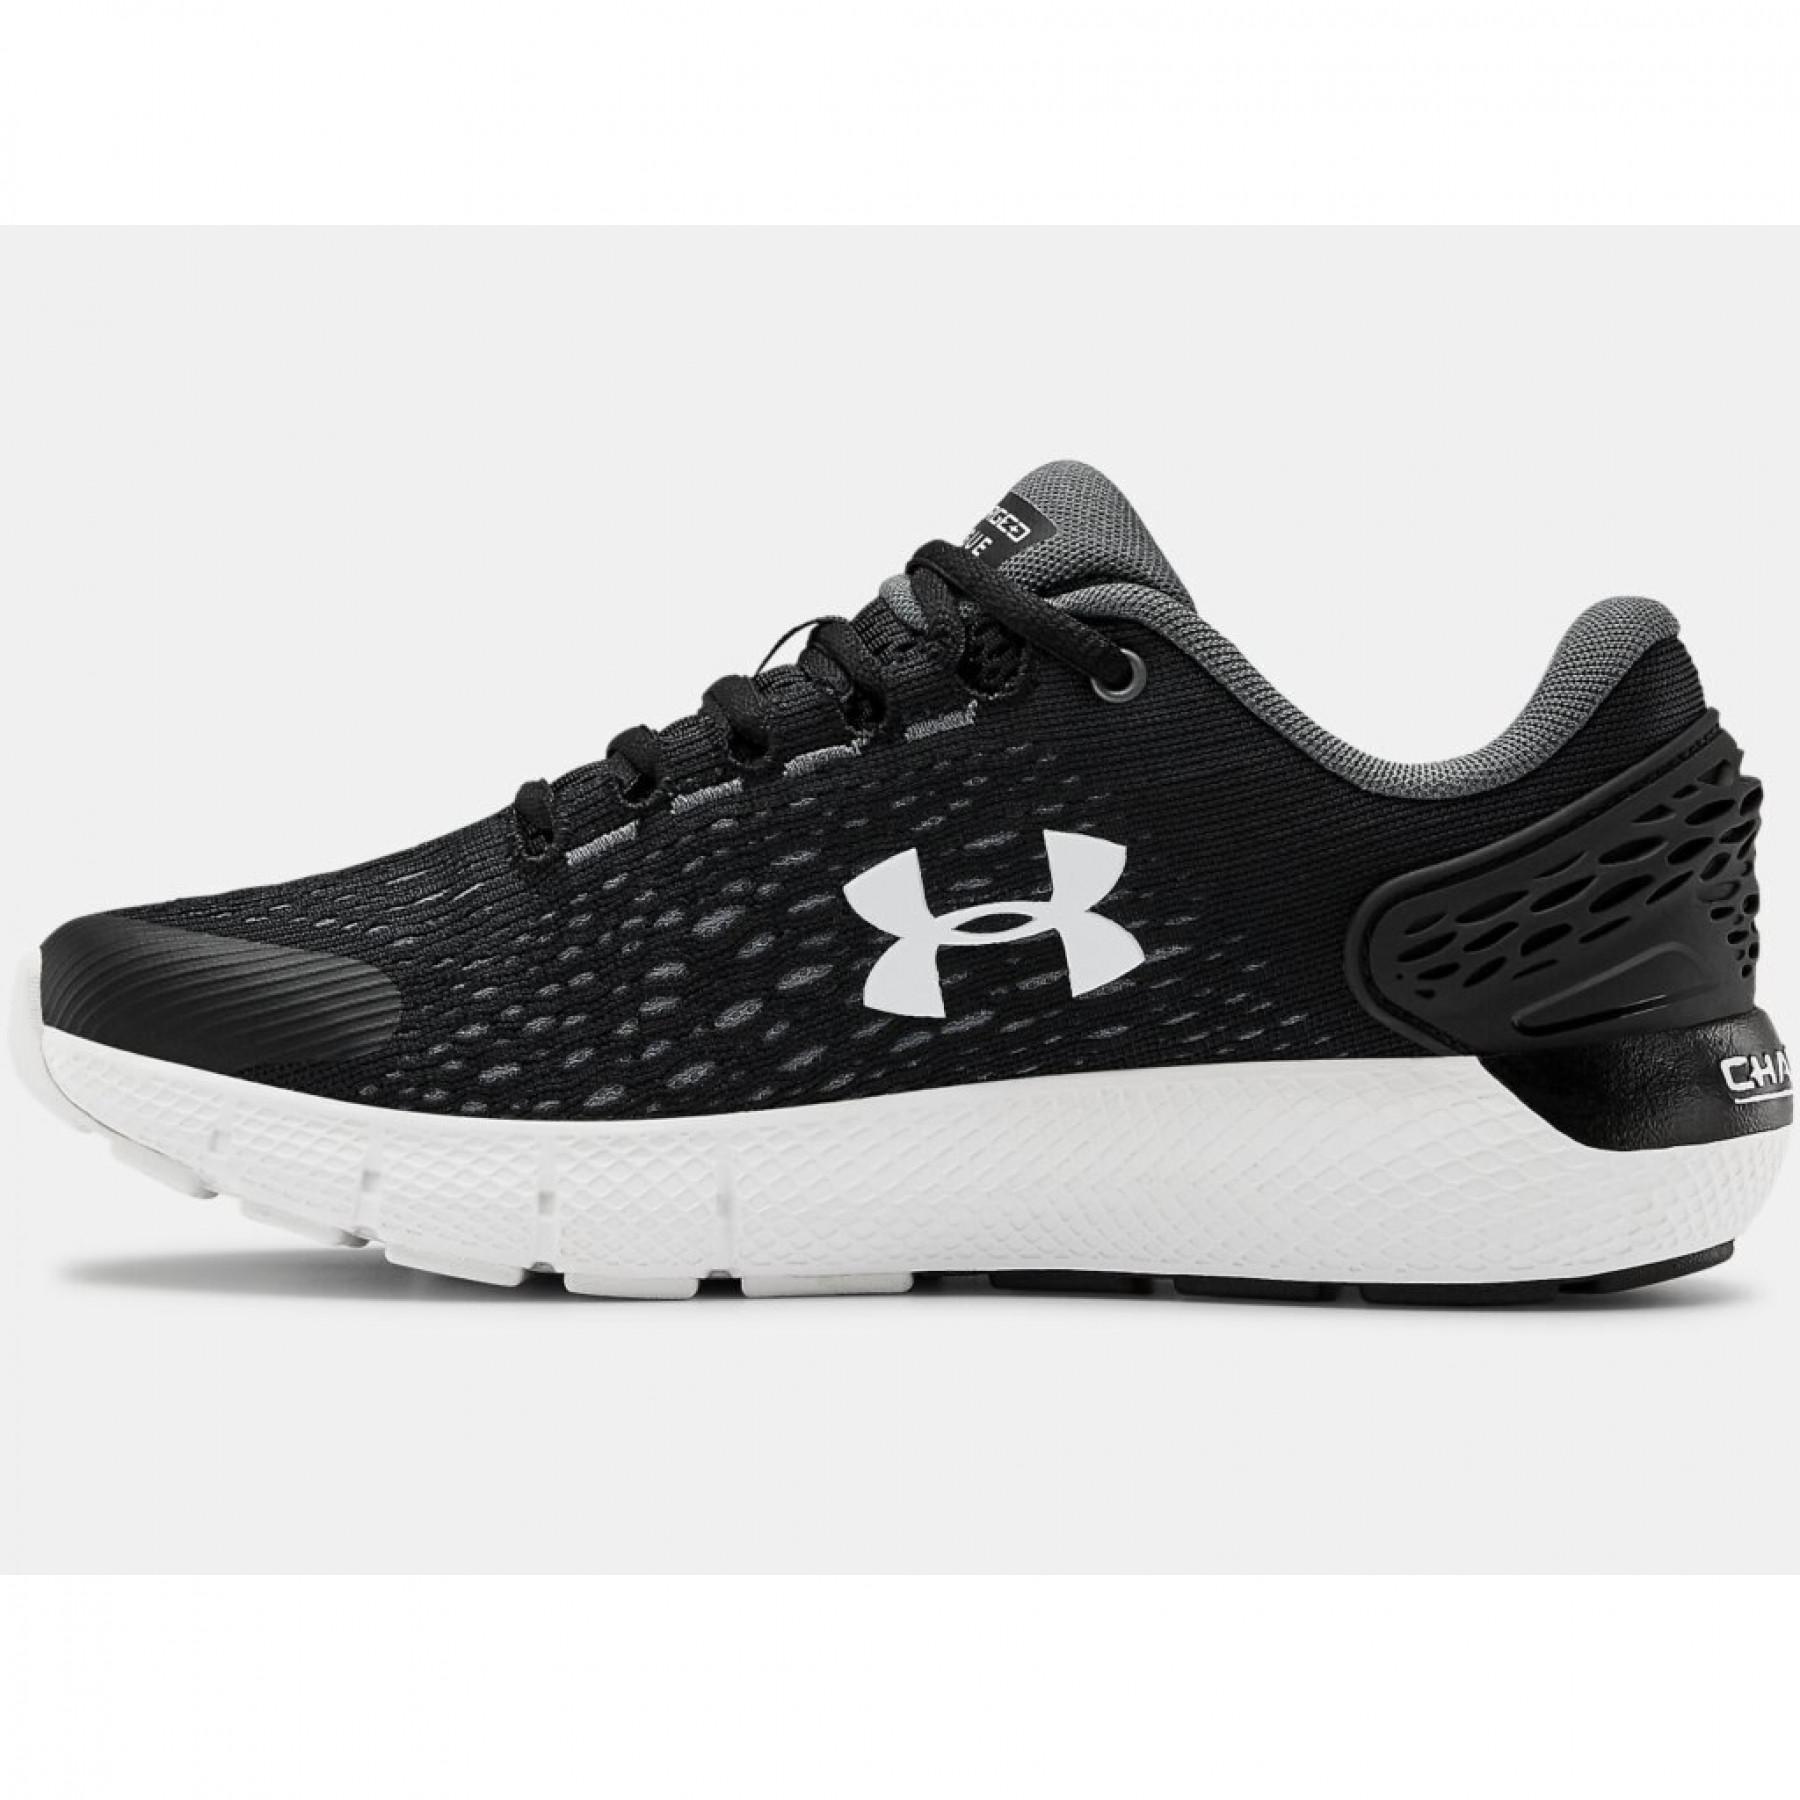 Children's shoes Under Armour Charged Rogue 2